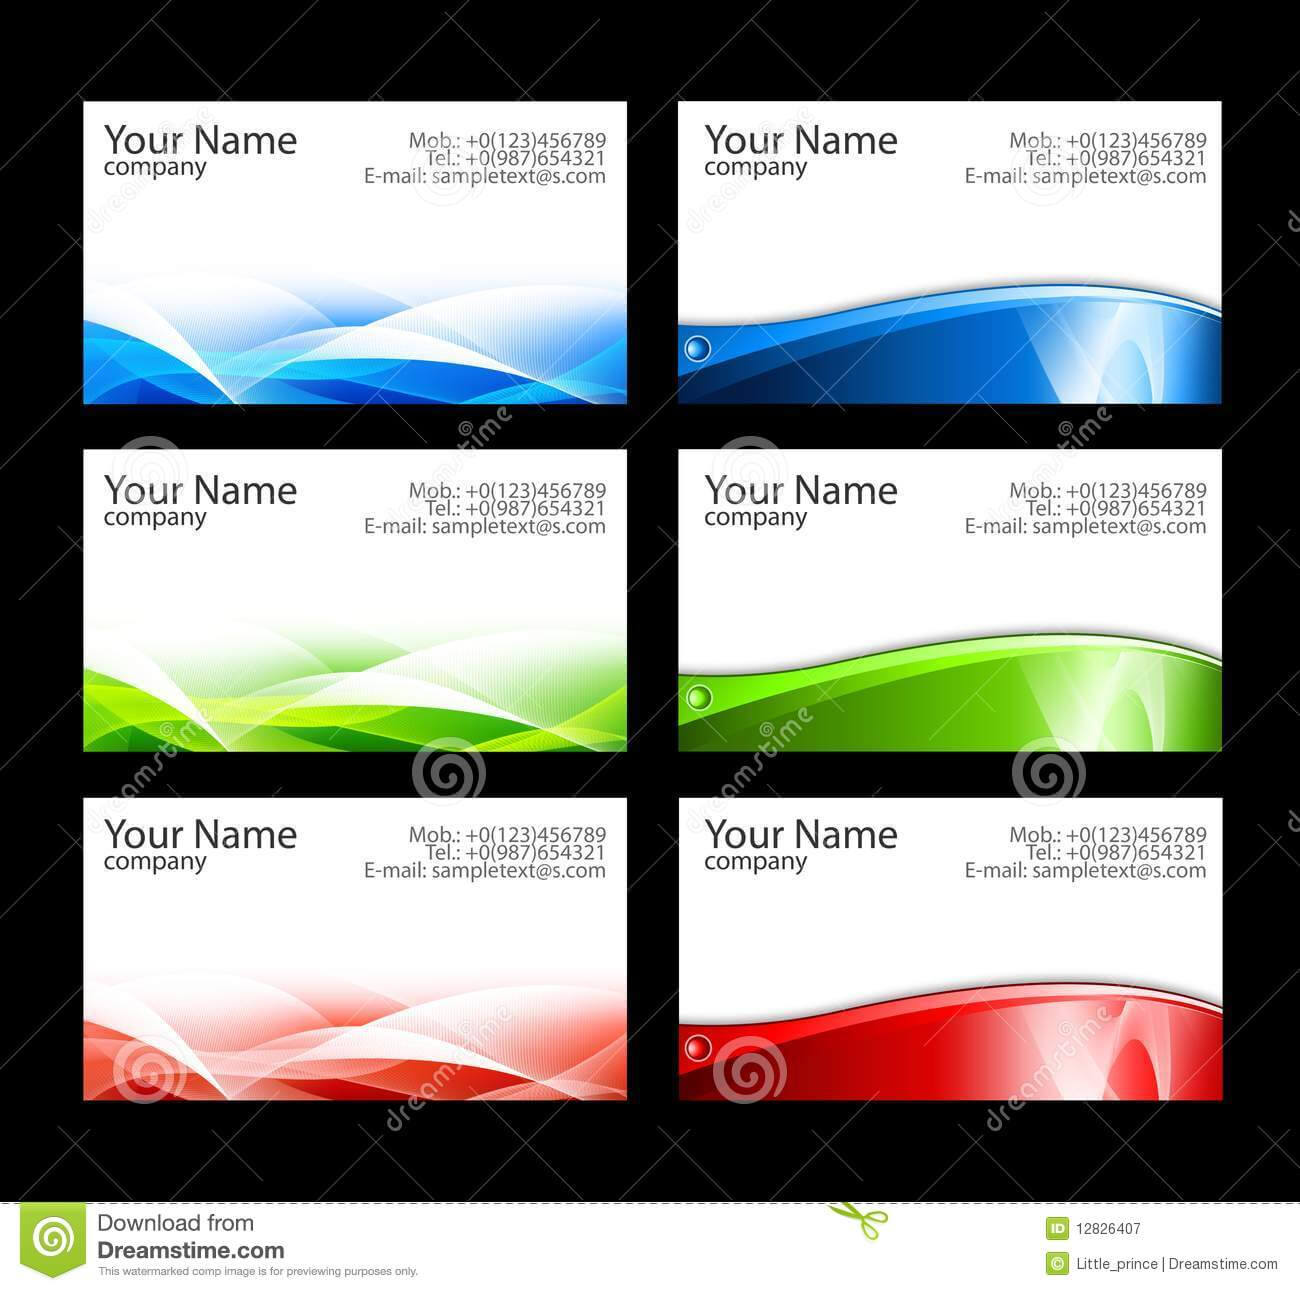 Microsoft Word Business Card Template Free Download – Yatay Within Free Editable Printable Business Card Templates